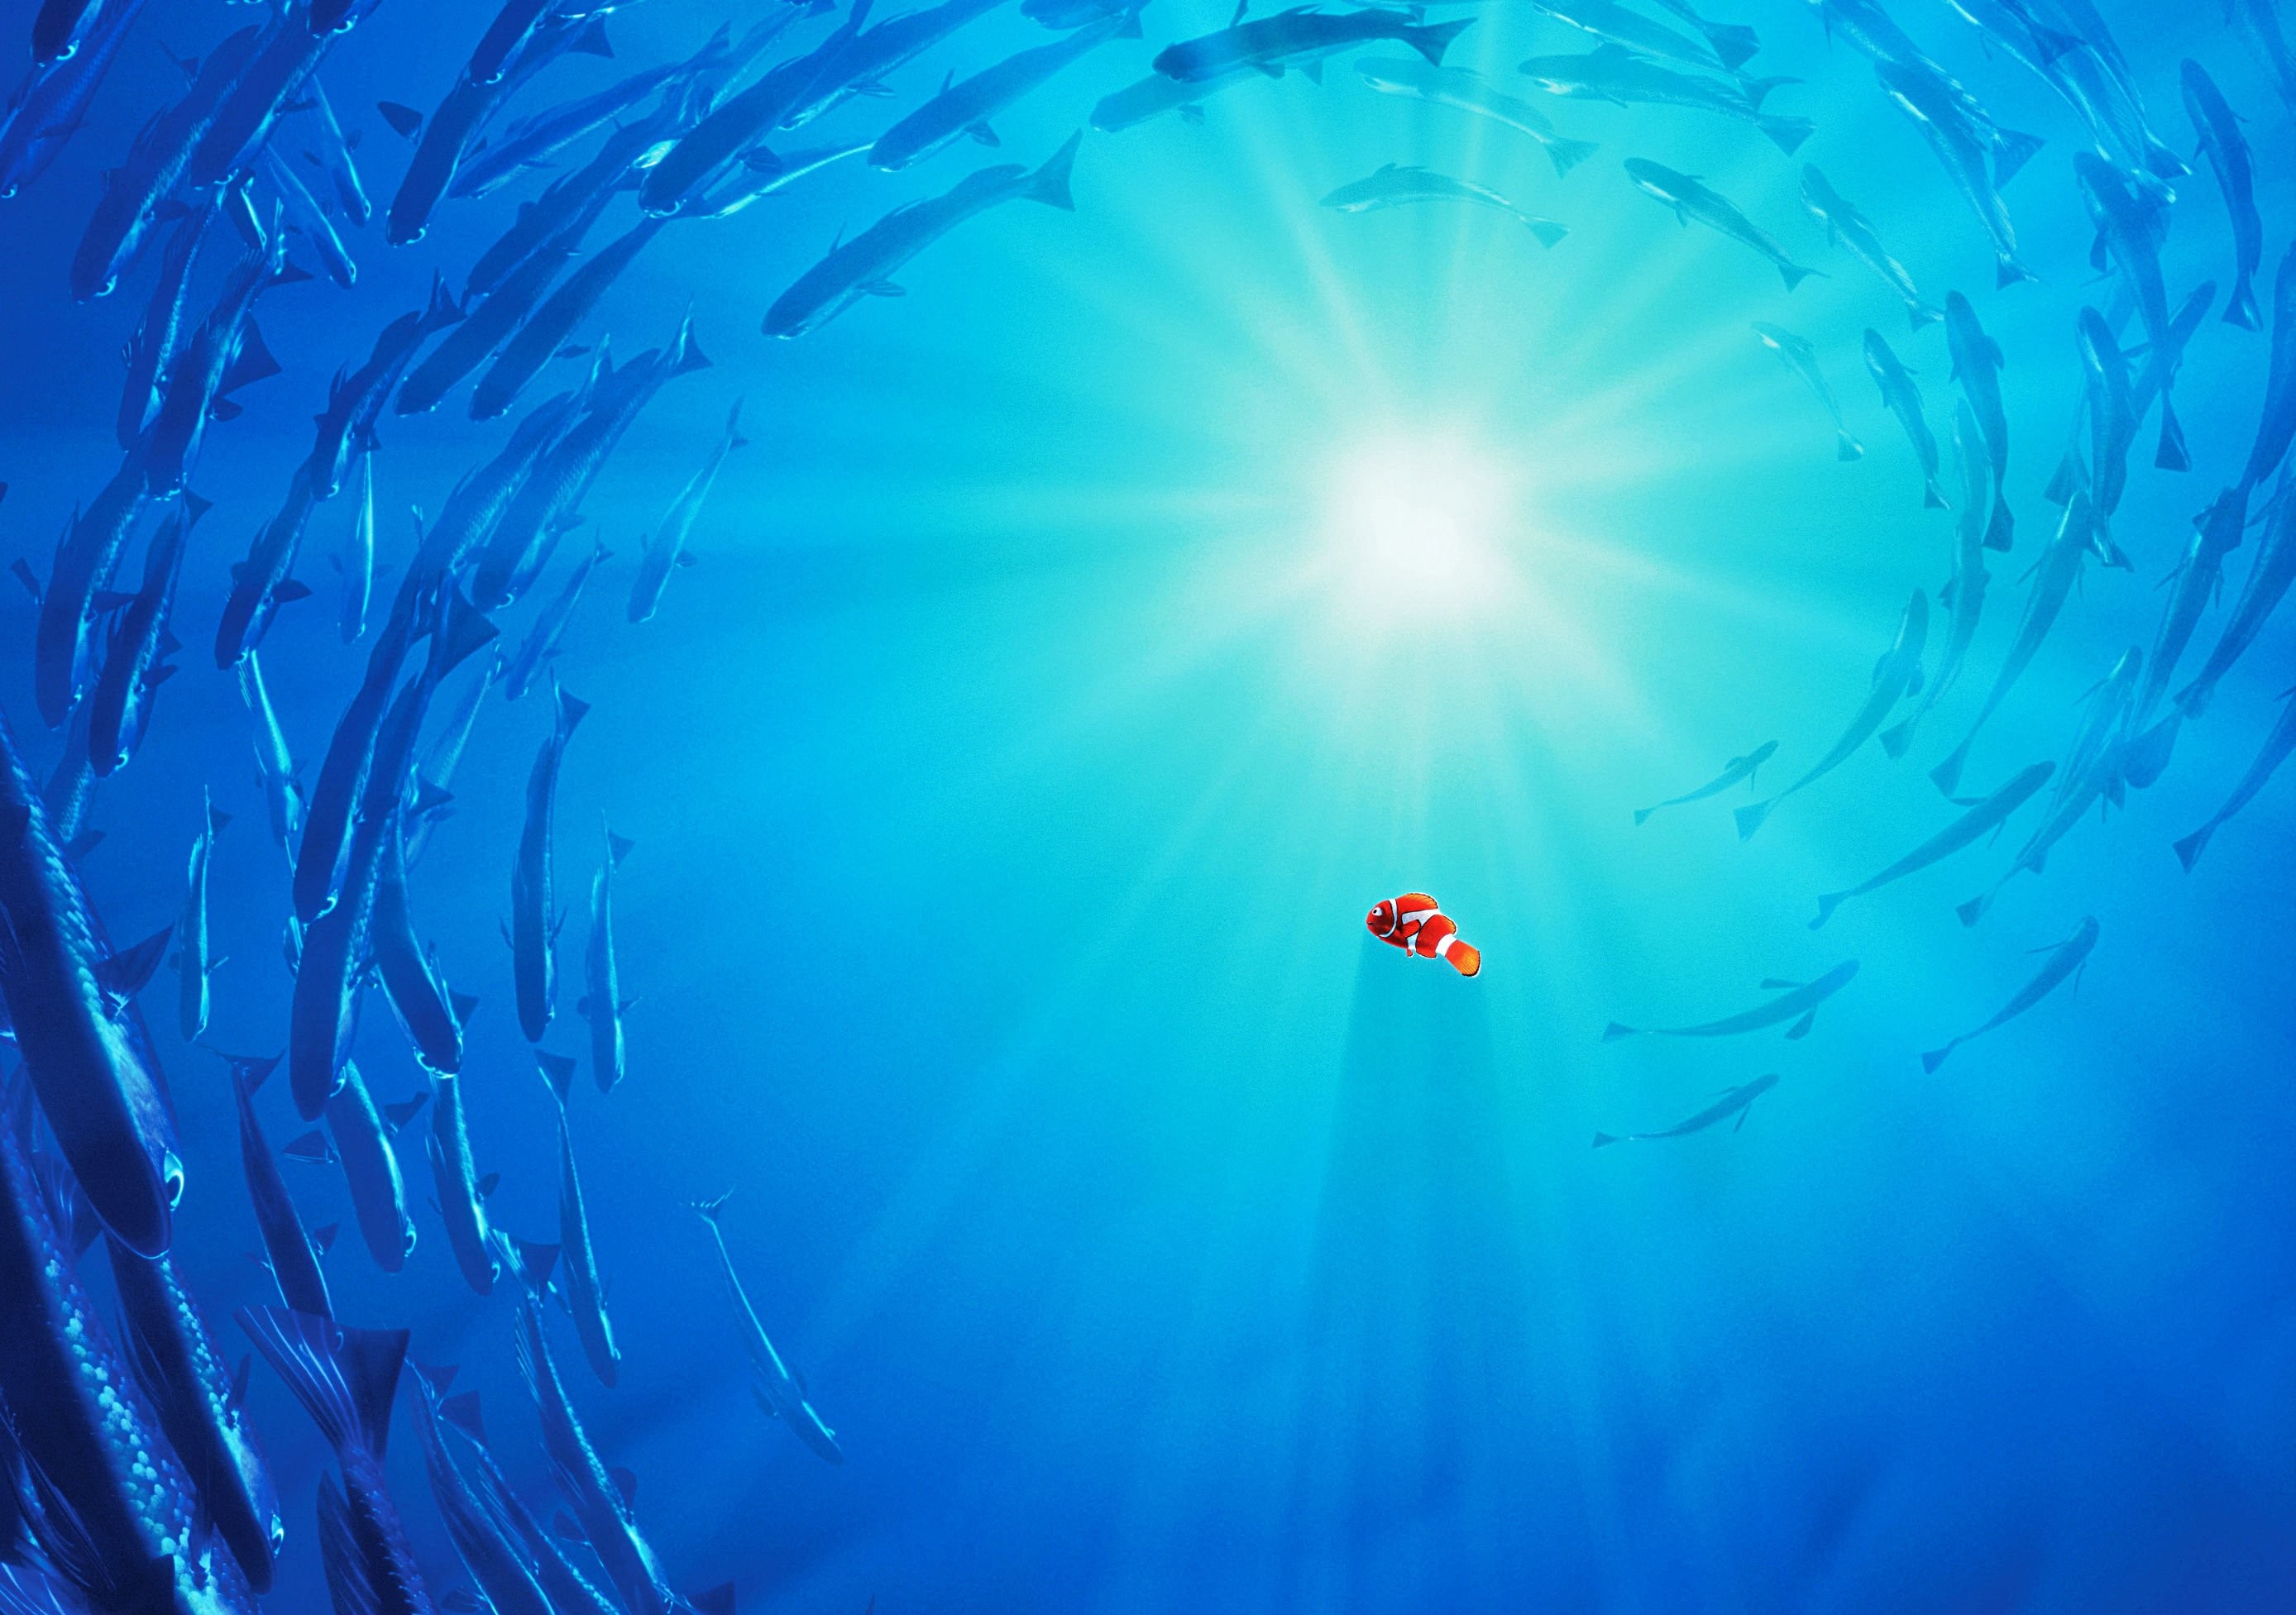 Background Wallpapers Â - Finding Nemo Backgrounds - HD Wallpaper 